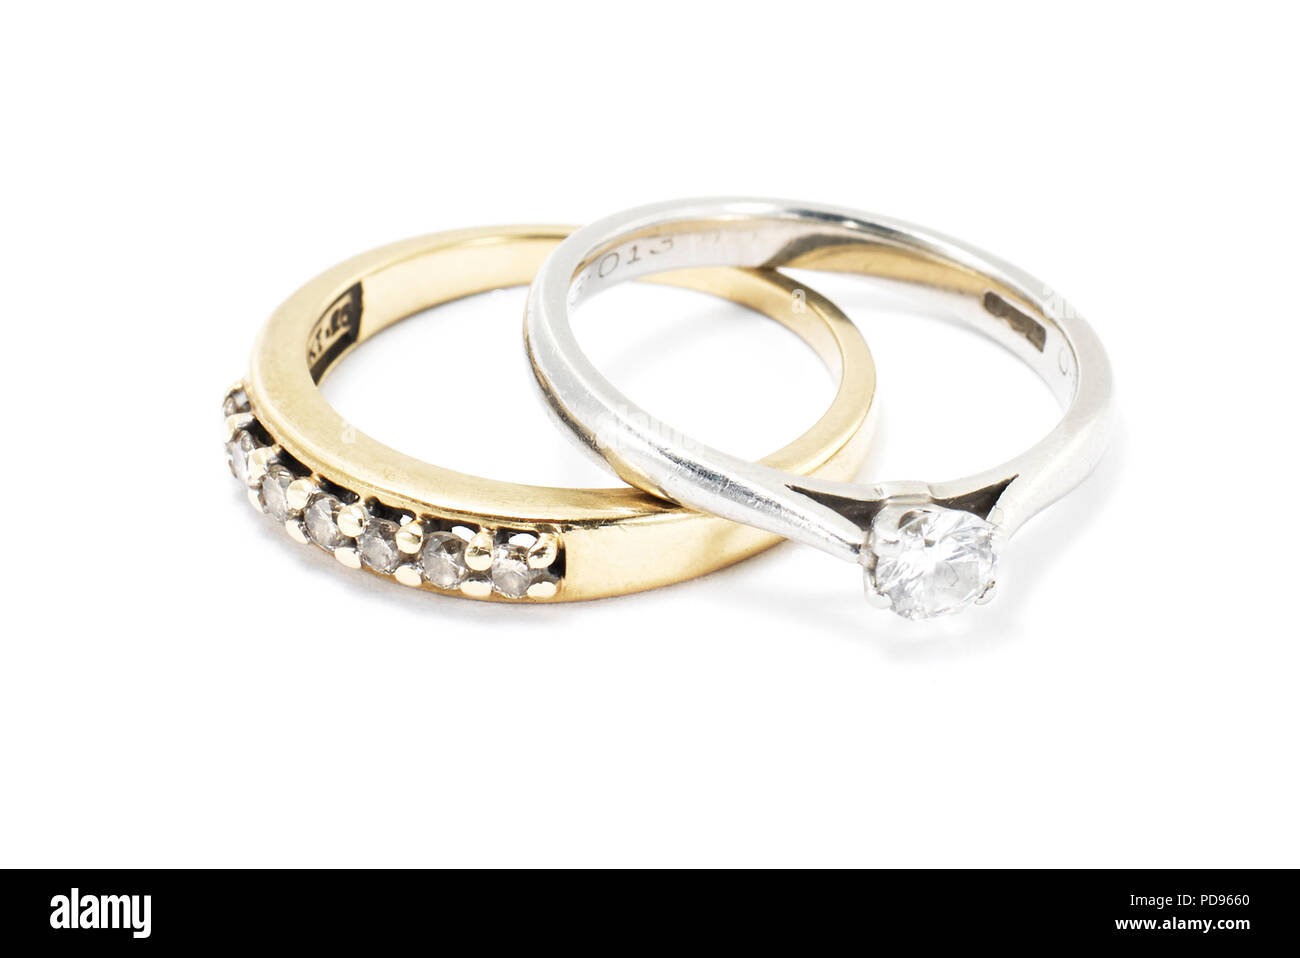 Wedding and engagement rings Stock Photo